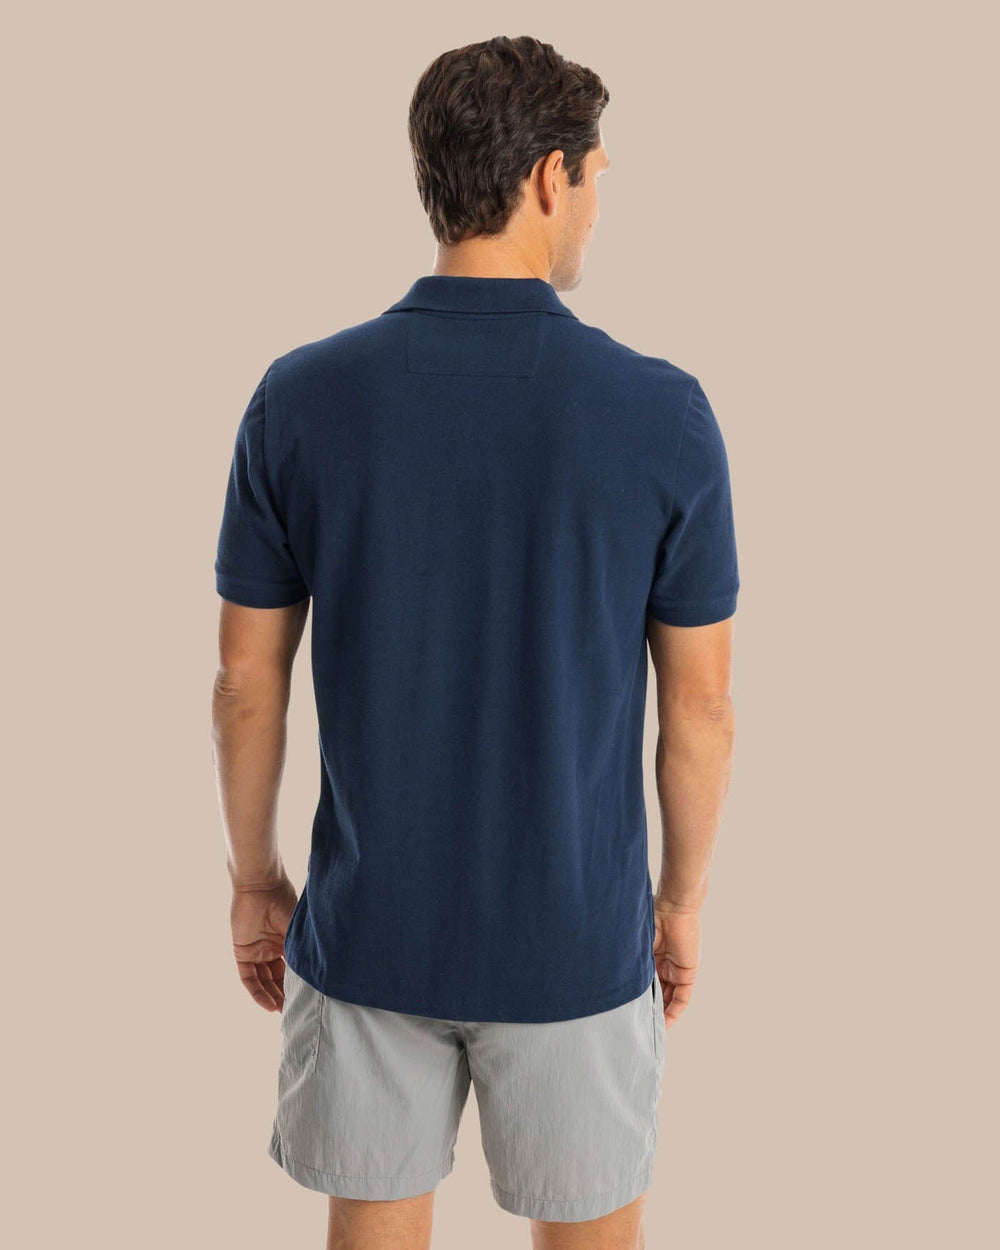 The back view of the Southern Tide new-skipjack-polo-shirt by Southern Tide - True Navy